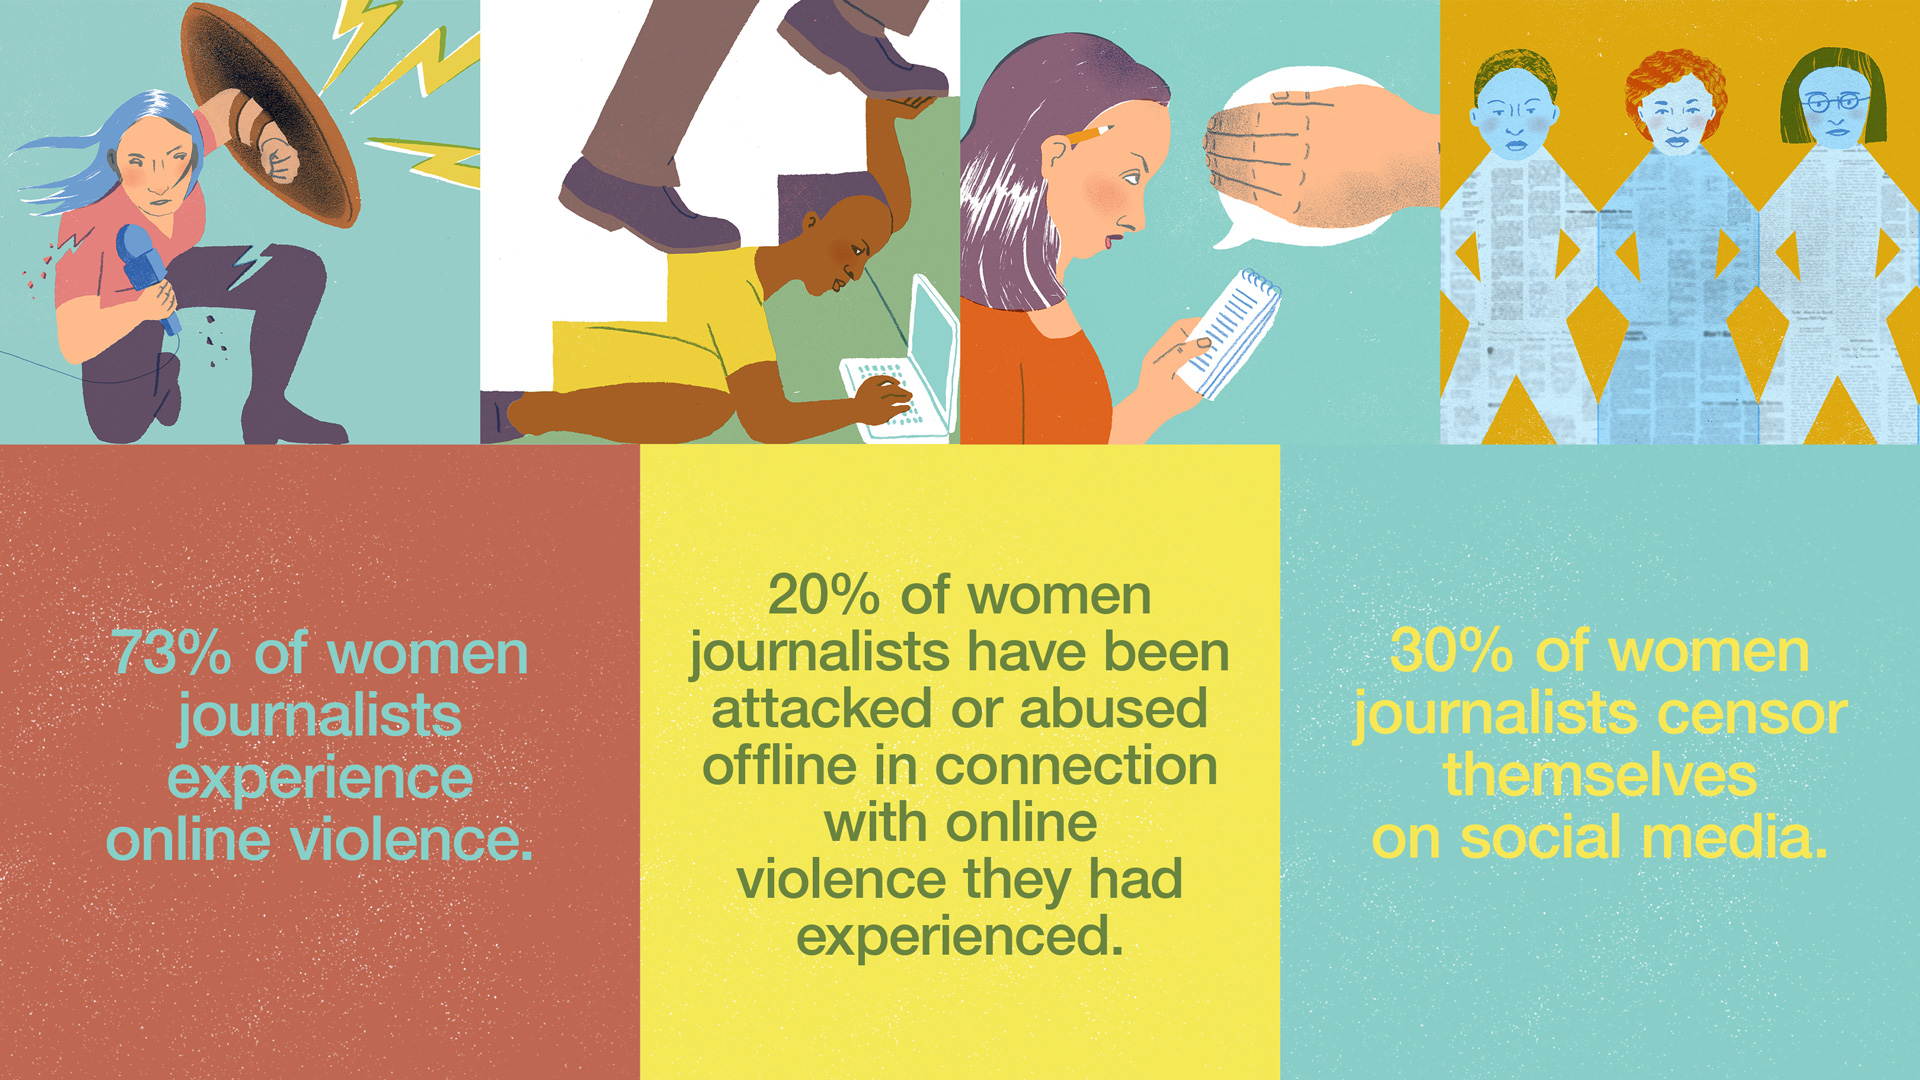 Awareness campaign on the threats faced by women journalists